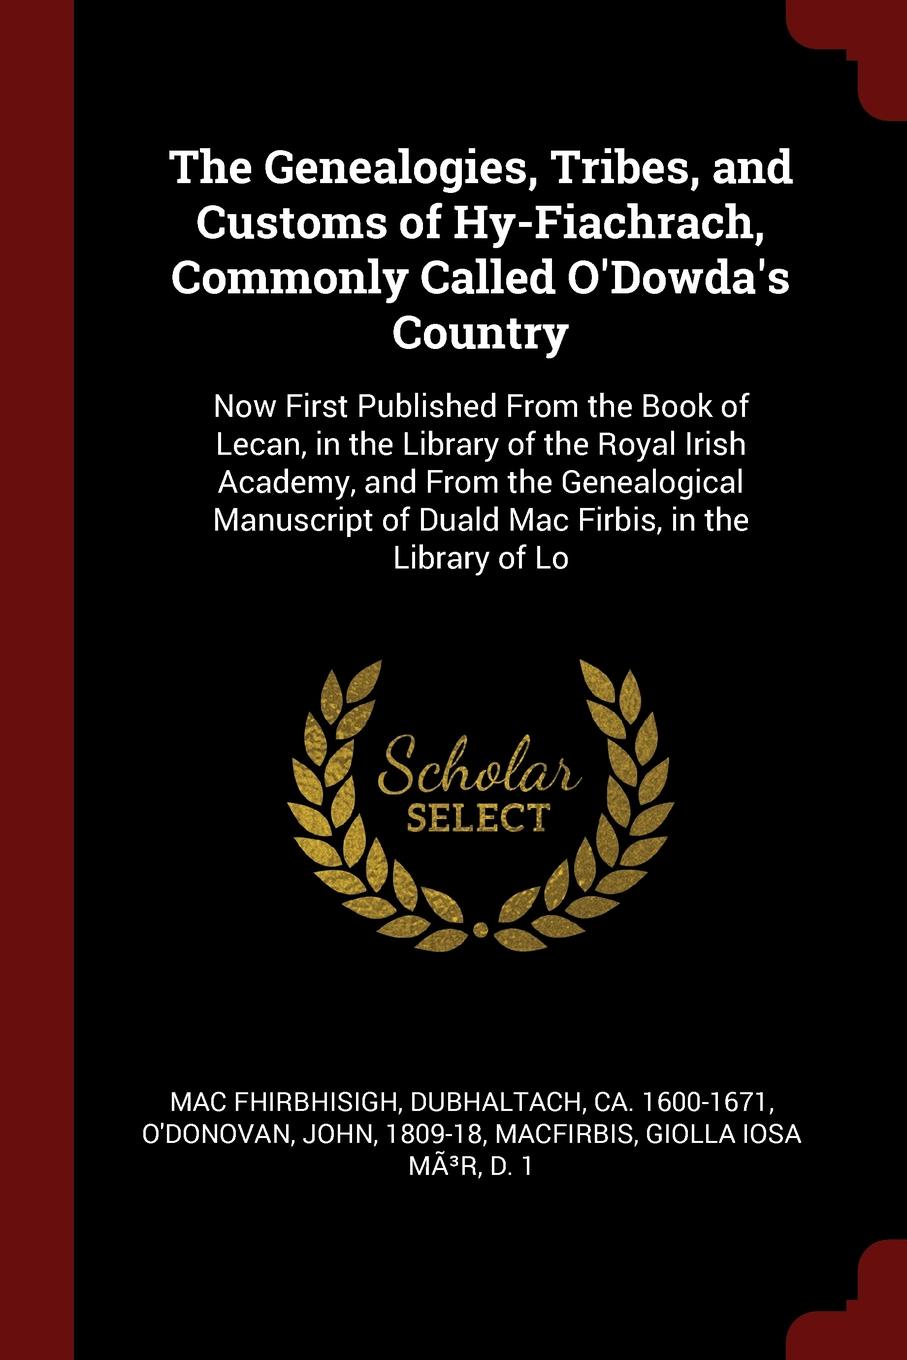 The Genealogies, Tribes, and Customs of Hy-Fiachrach, Commonly Called O`Dowda`s Country. Now First Published From the Book of Lecan, in the Library of the Royal Irish Academy, and From the Genealogical Manuscript of Duald Mac Firbis, in the Librar...